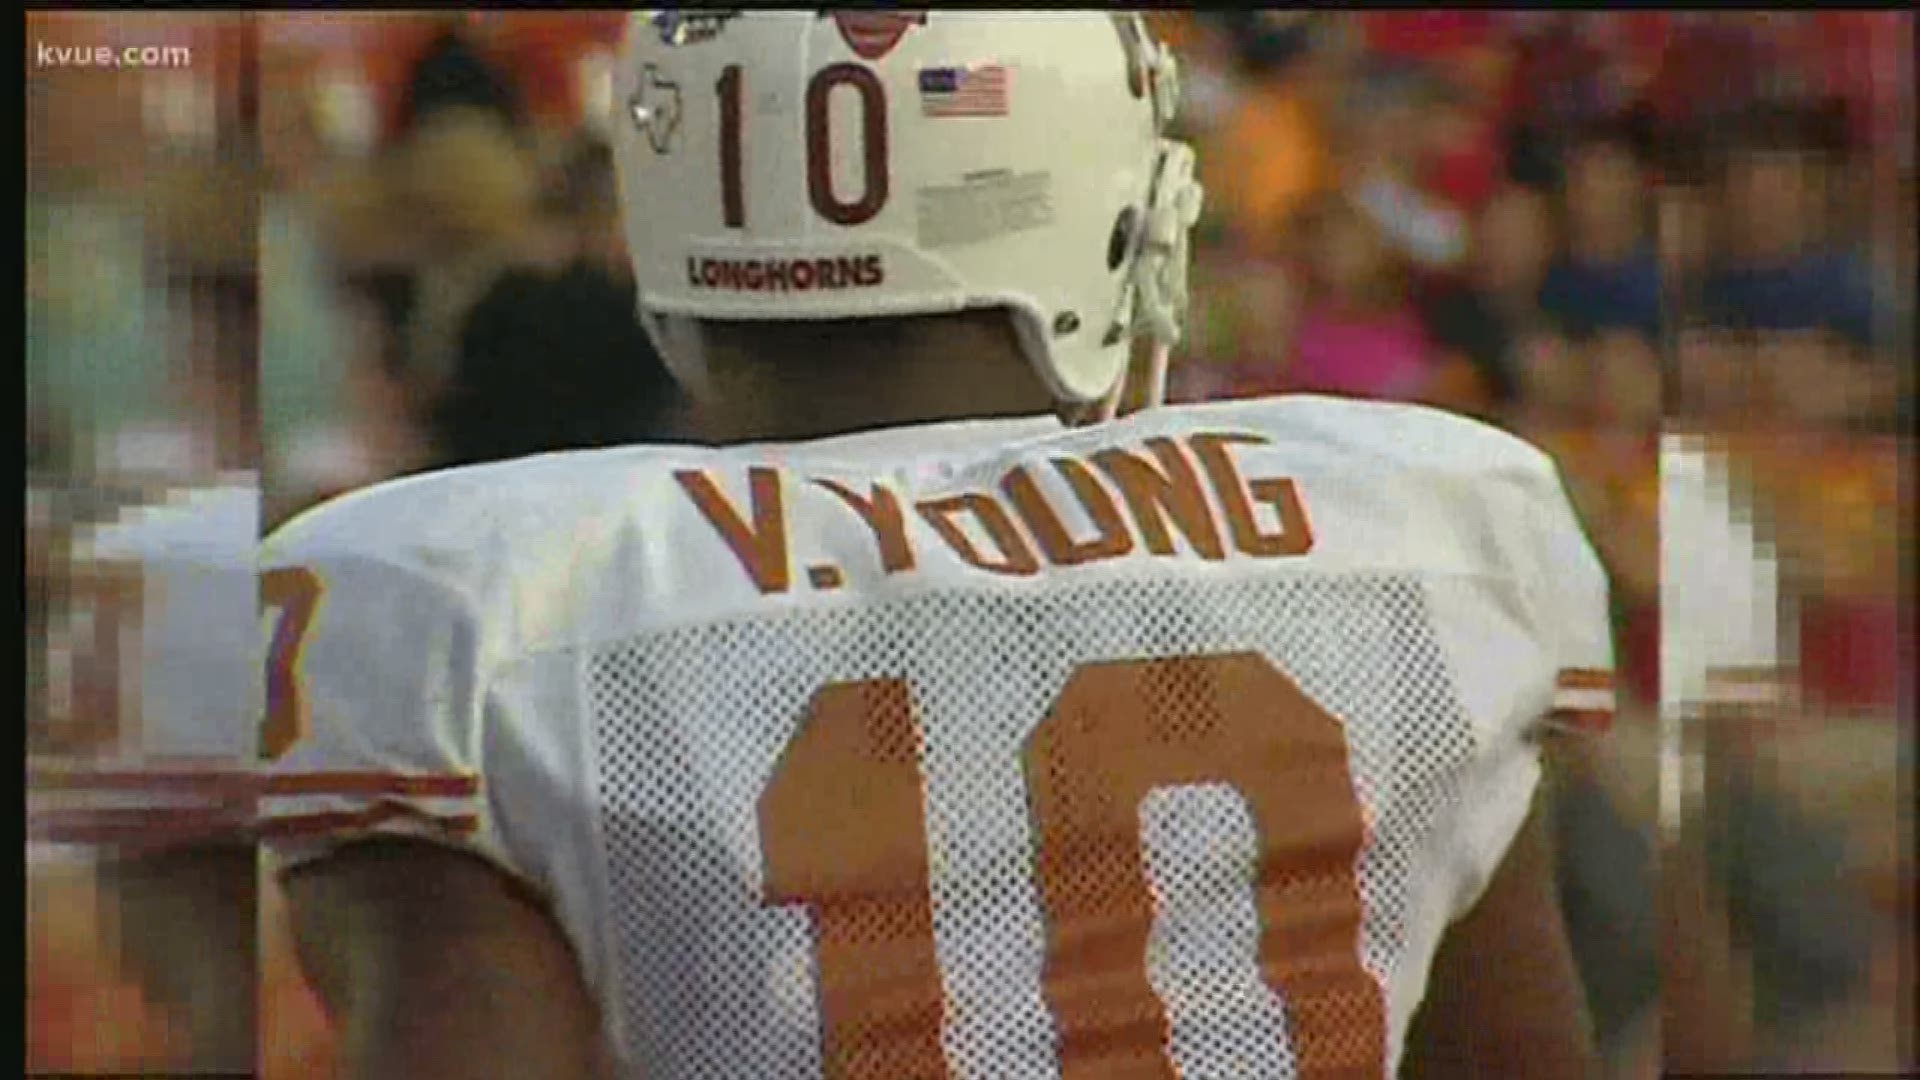 Former UT quarterback Vince Young will be inducted into the College Football Hall of Fame.